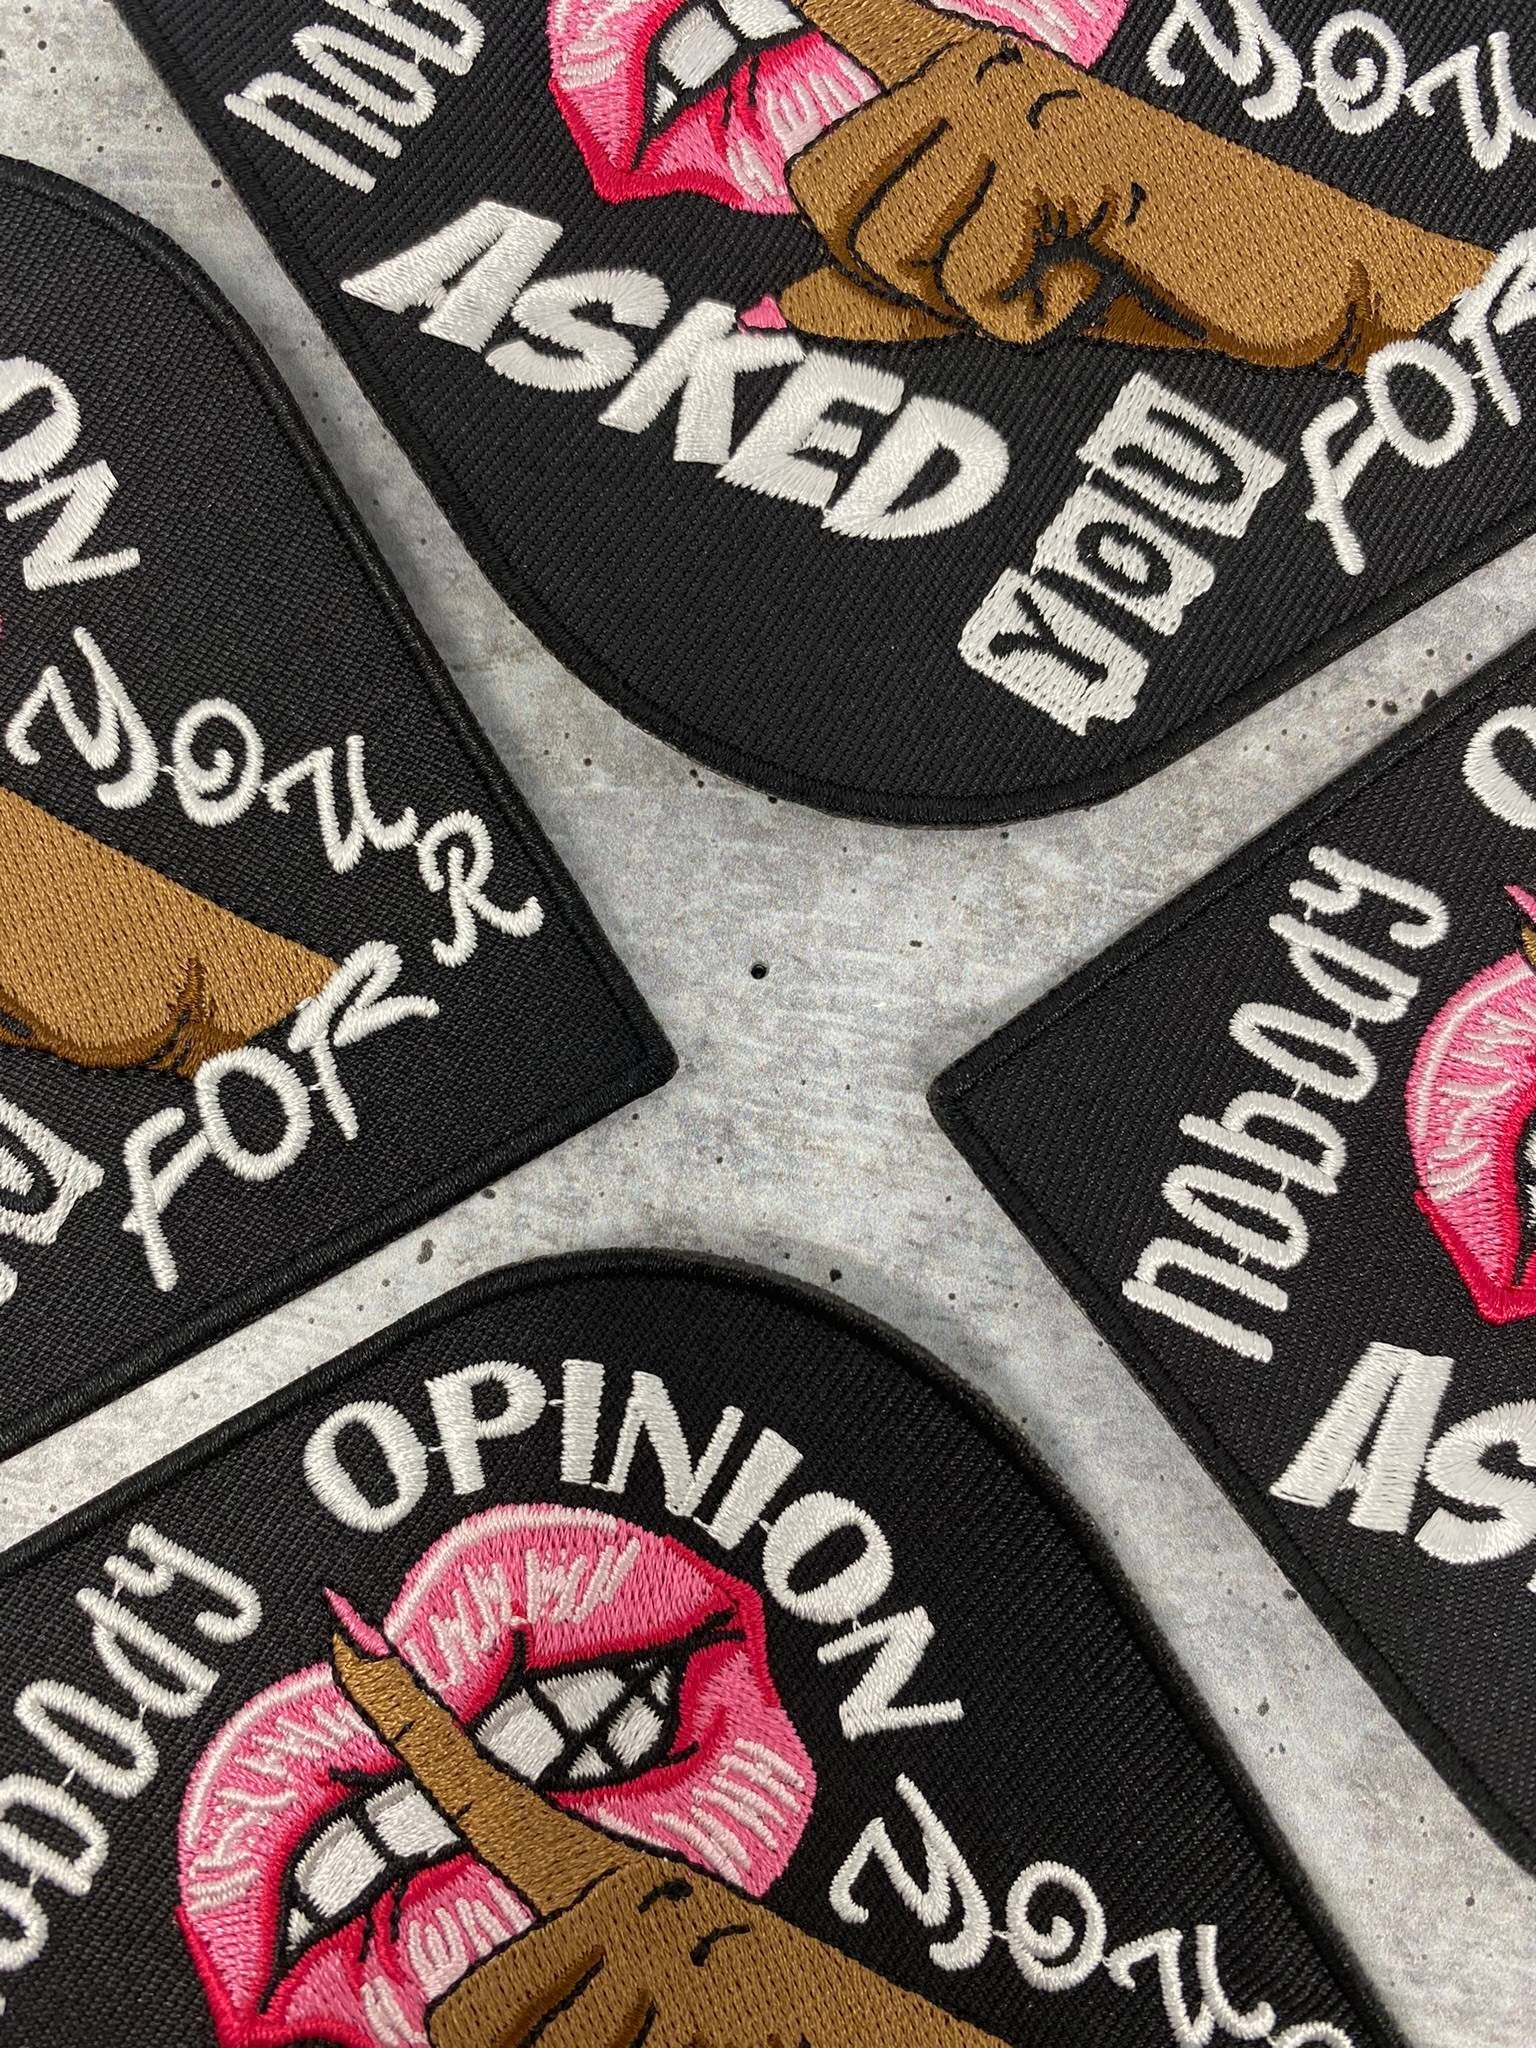 Exclusive,  1-pc "Nobody Asked you For Your Opinion", Size 4", Iron on Patch, Applique for Clothing, Patch for Crocs, Jackets, Hats, DIY